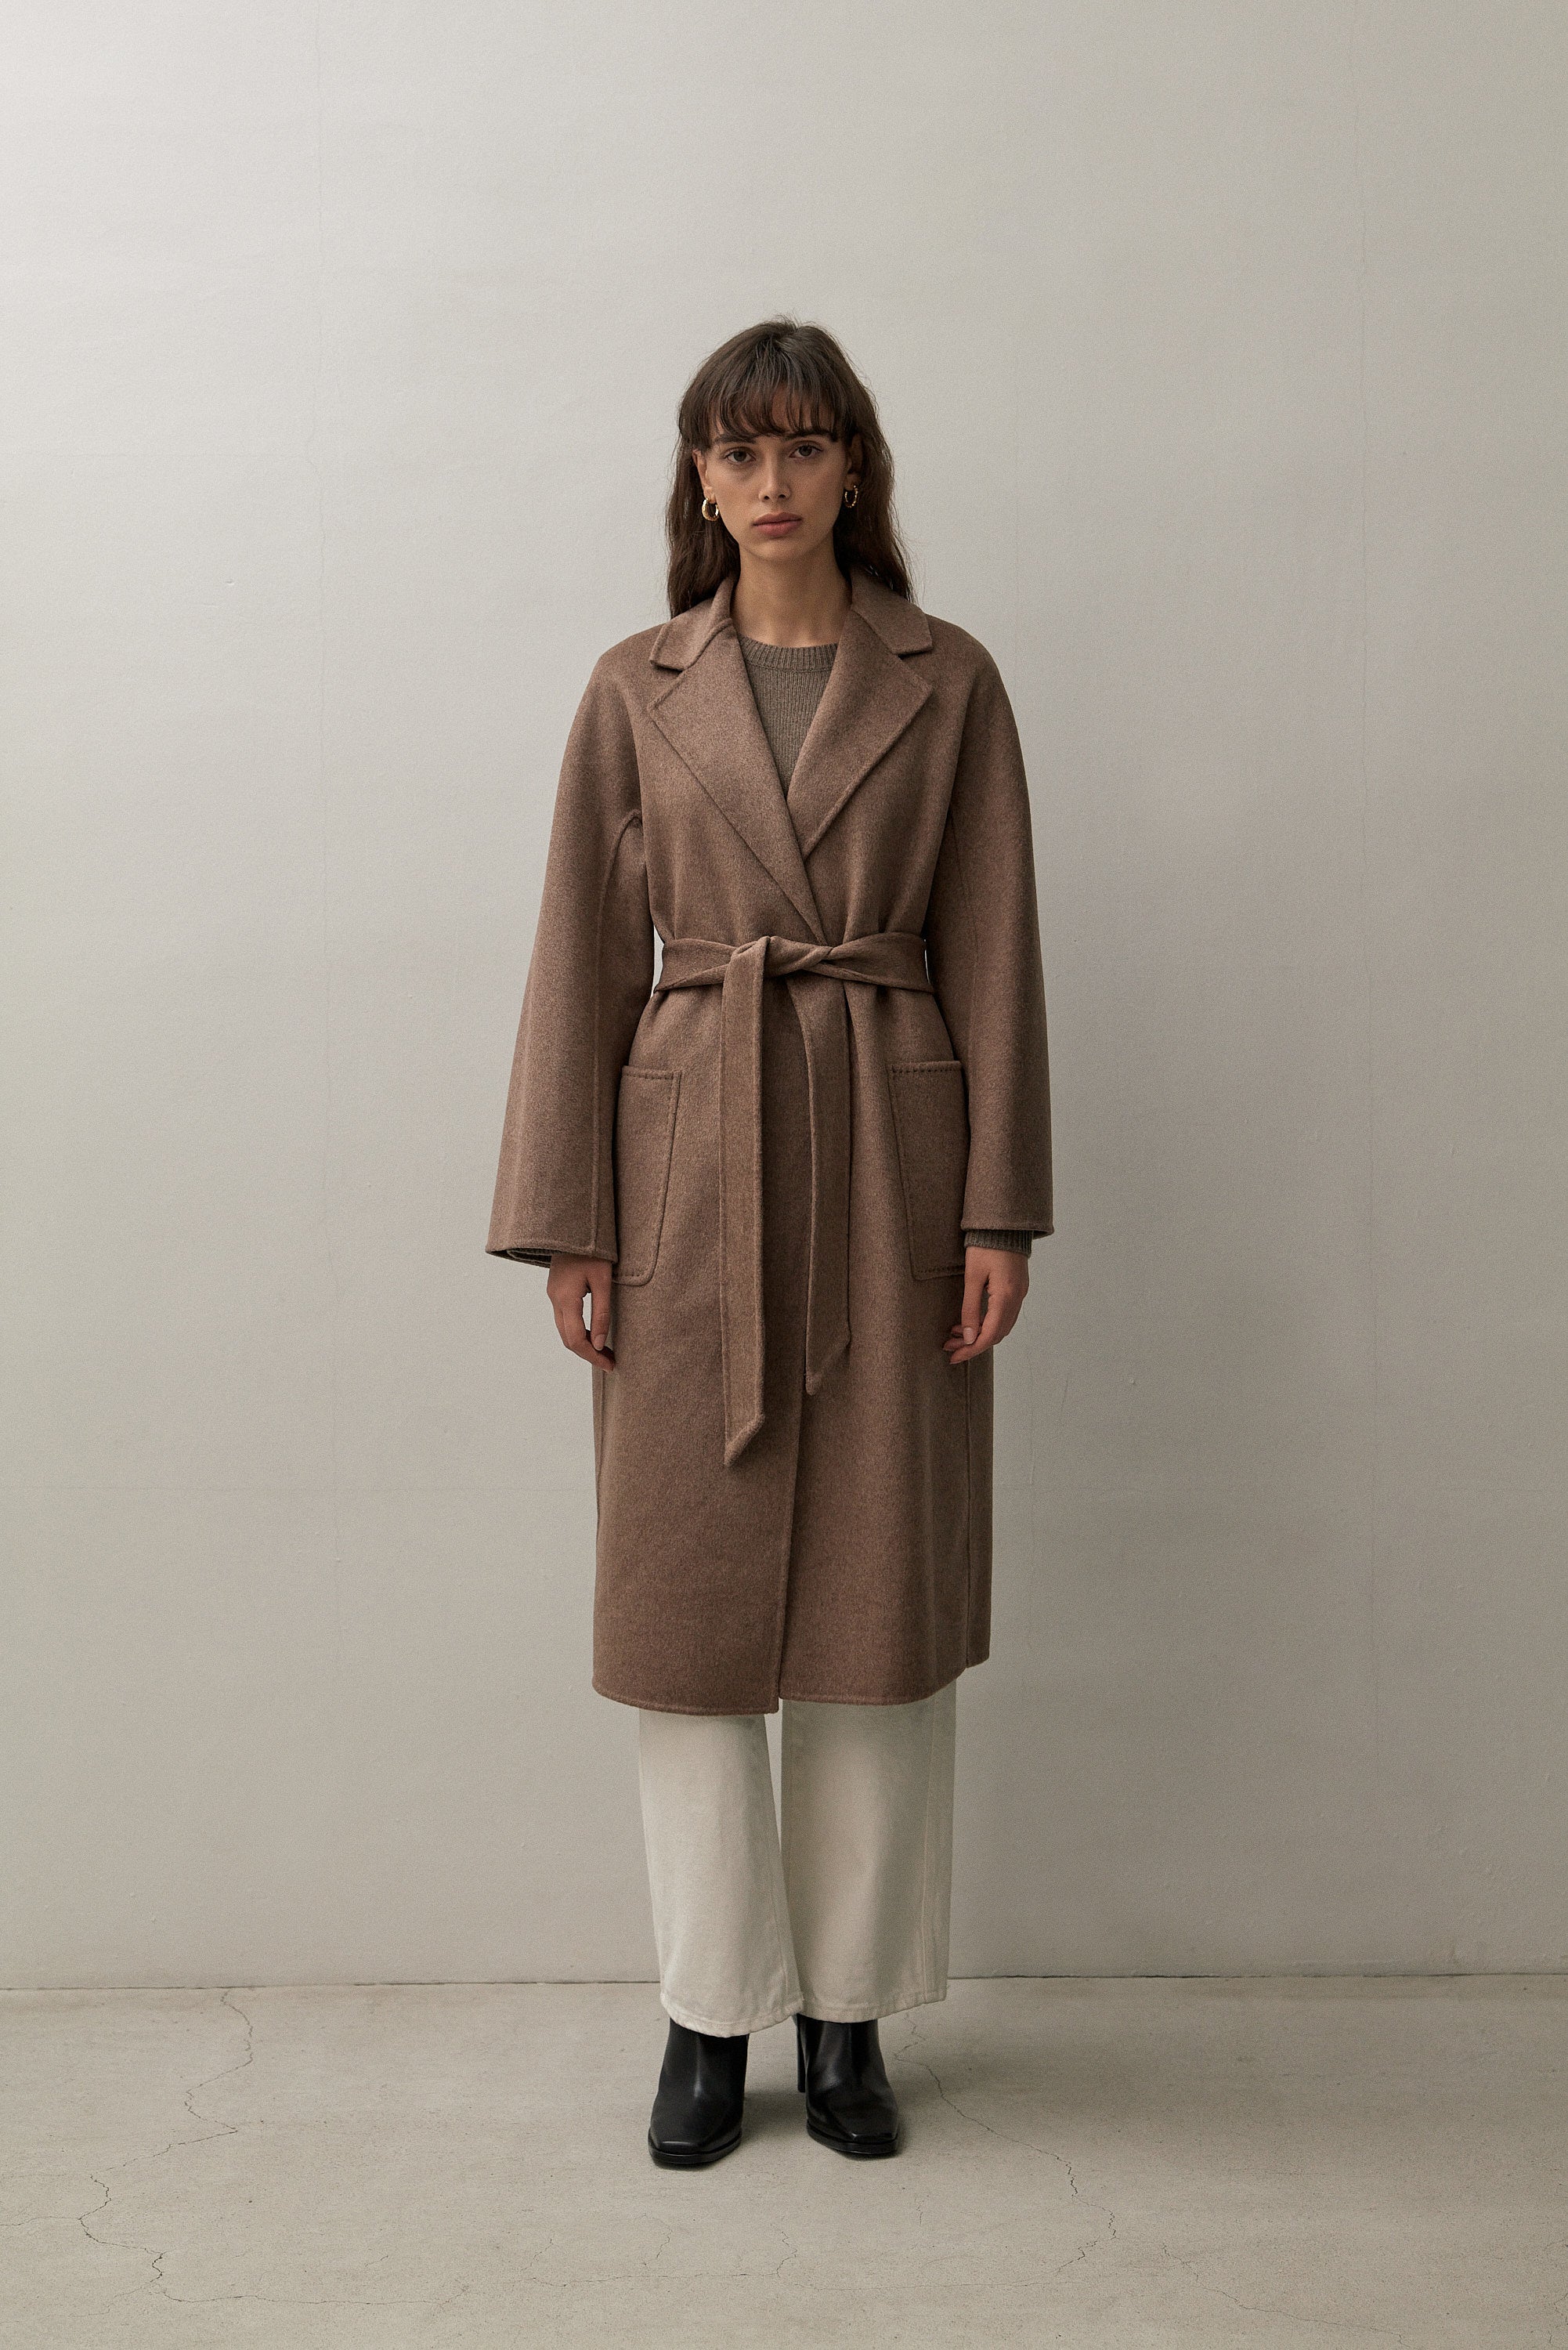 – CURATED MELANGE COAT - THE THE CHOCOLATE CLASSIC